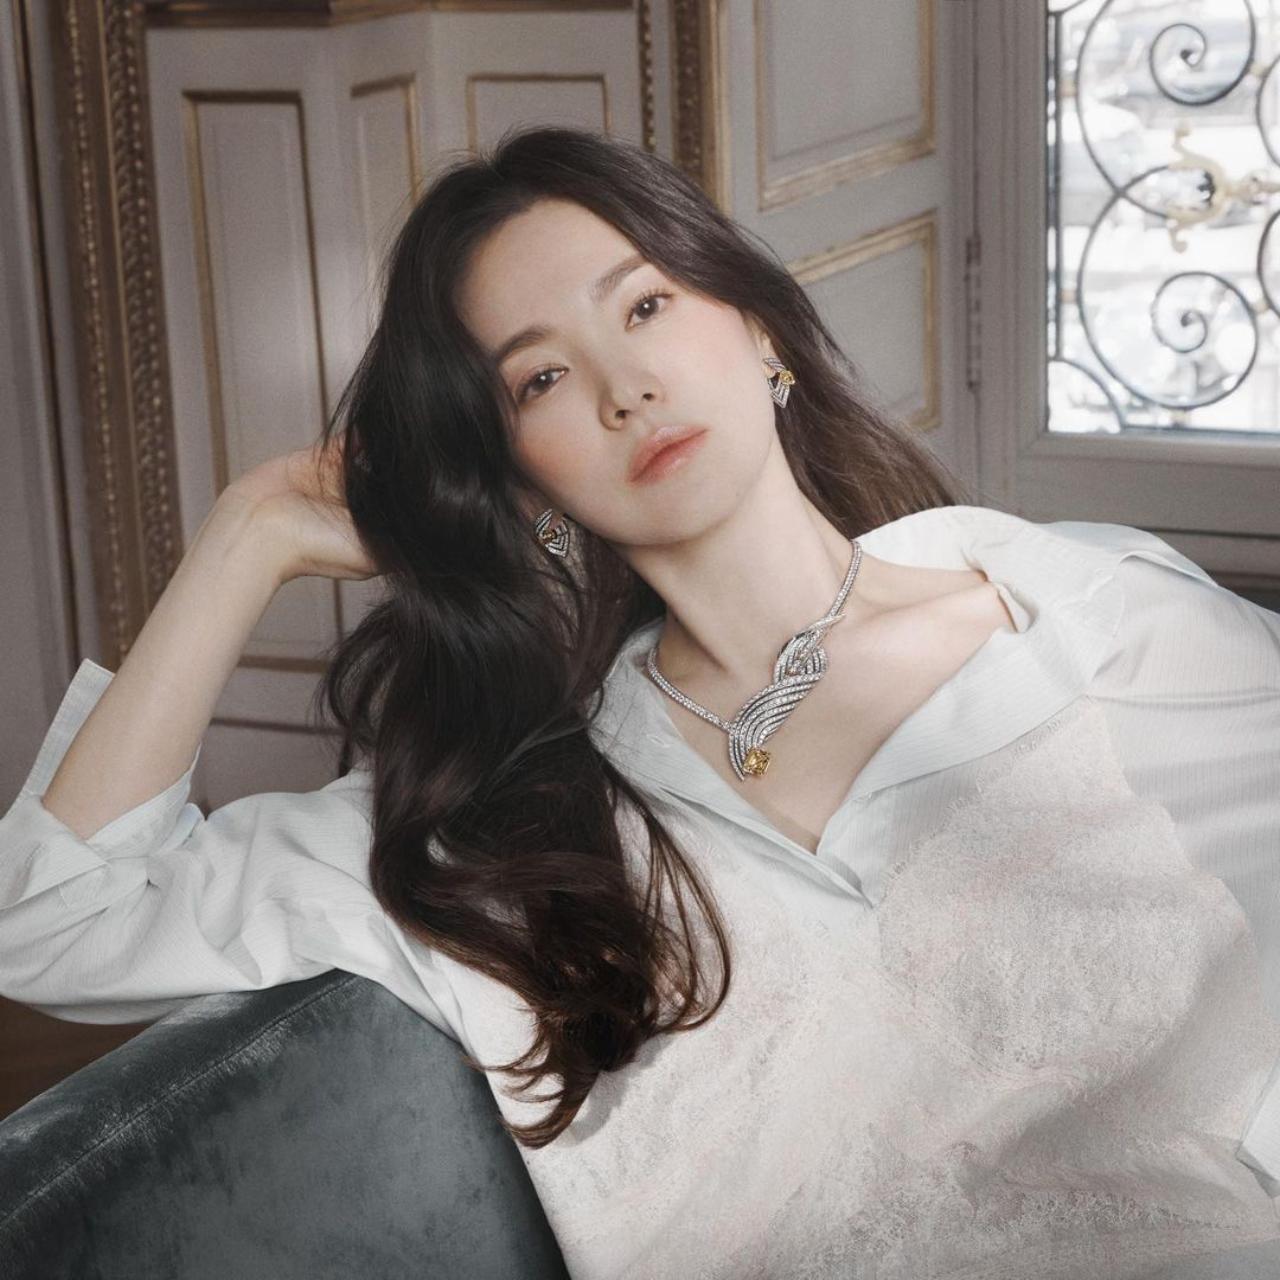 Hye Kyo also represented jewellery label, Chaumet and her elegant and graceful image perfectly heightened the beauty of the Maison's creations. Hye Kyo wore several of Chaumet's elegant jewels while promoting for the label, from everyday pieces to sophisticated high jewellery creations